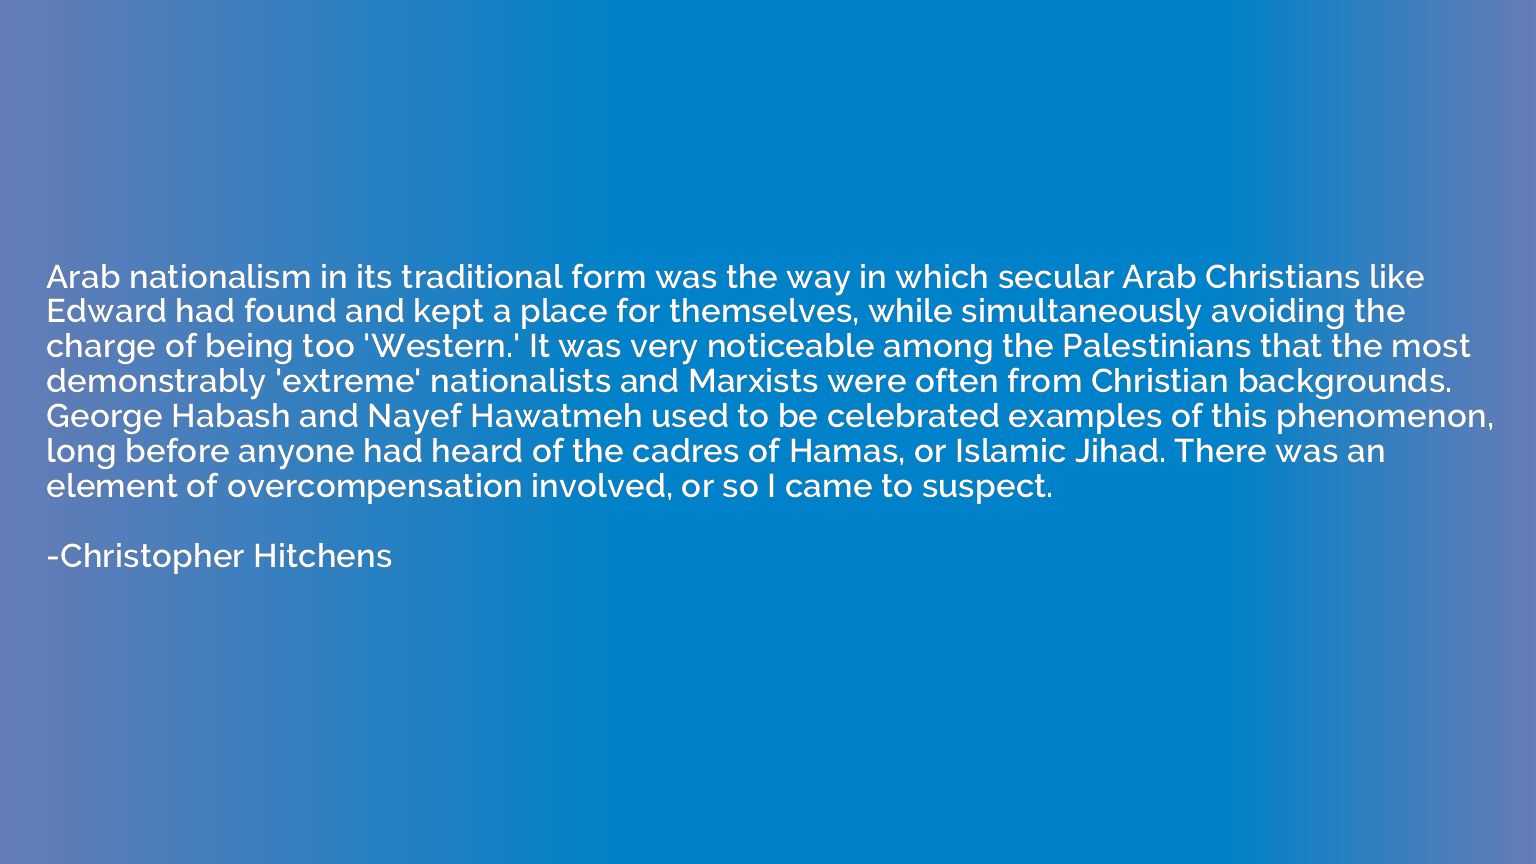 Arab nationalism in its traditional form was the way in whic